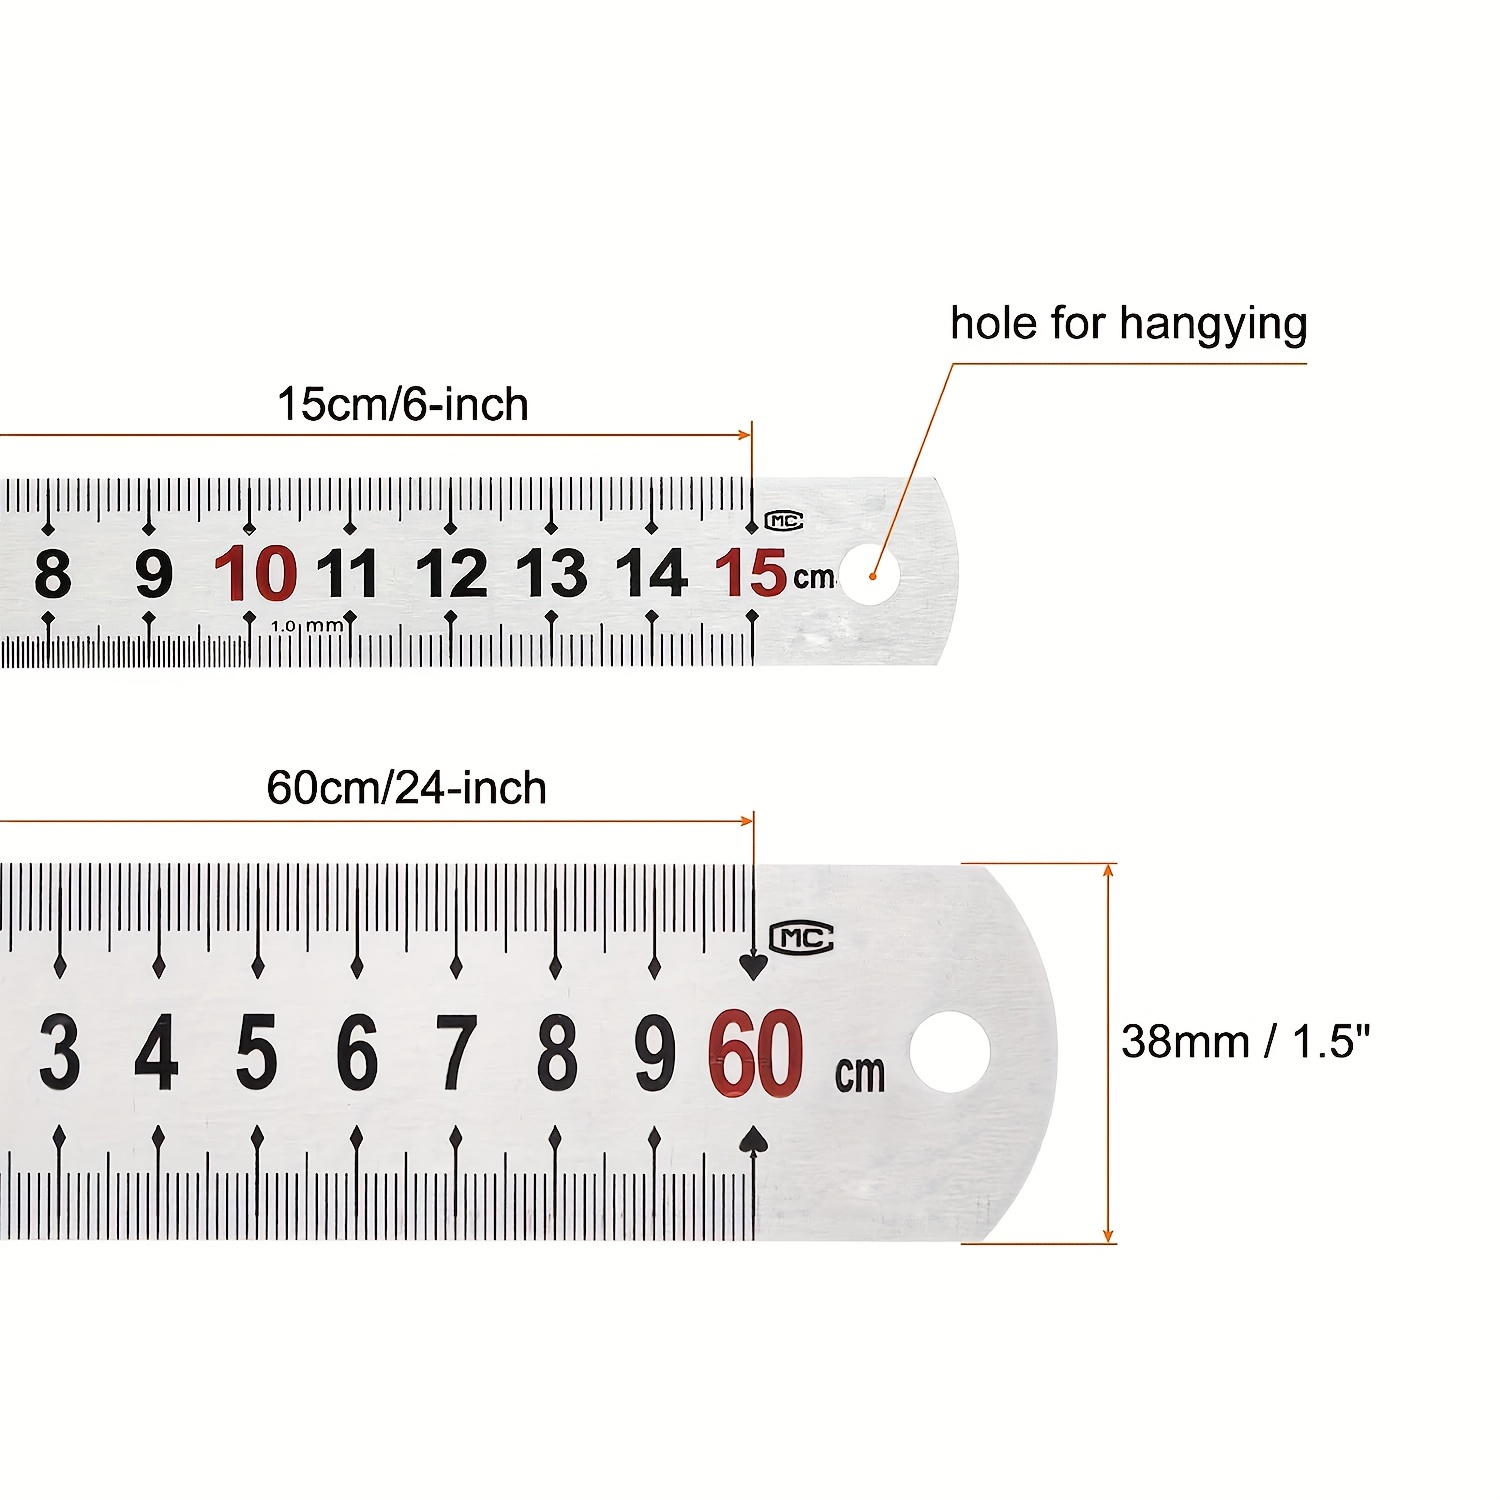 ruler inches to scale